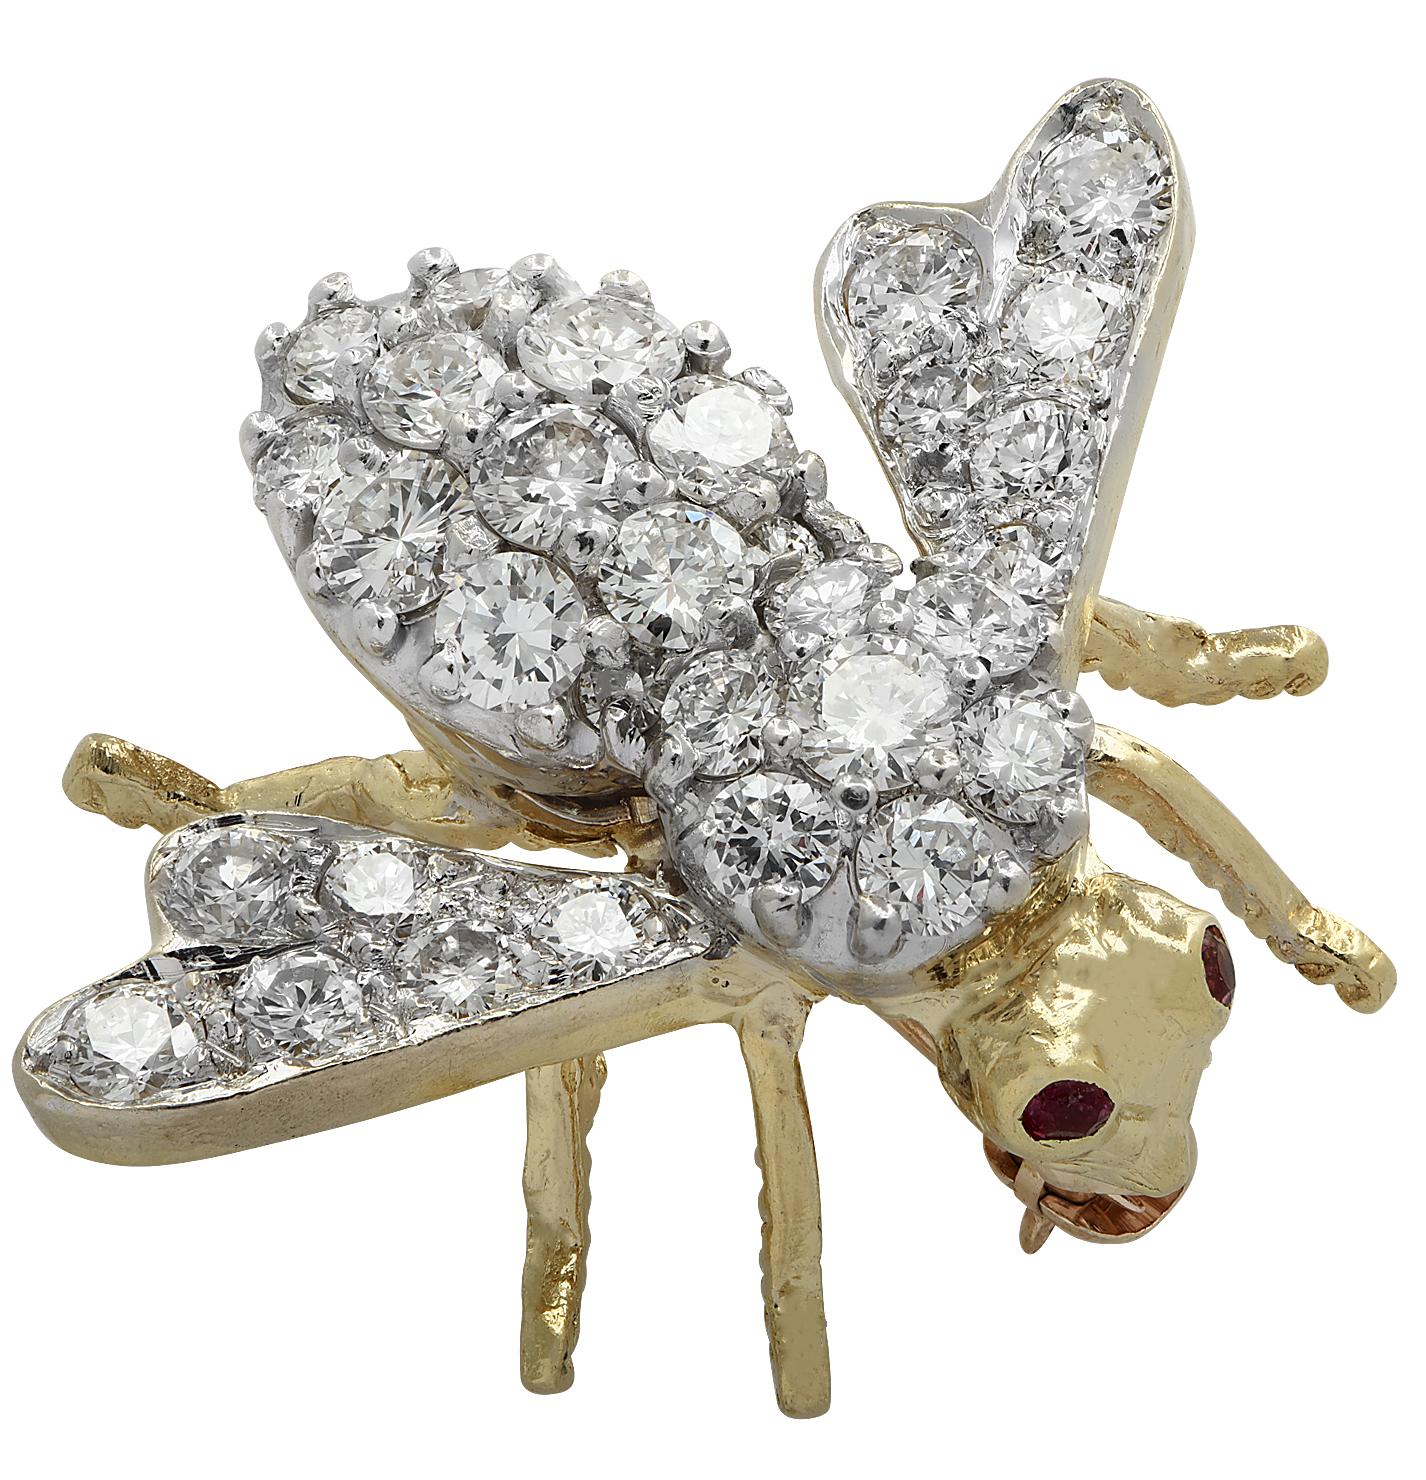 Enchanting David Hammerman bee brooch pin crafted in 18 karat white and yellow gold featuring 31 round brilliant cut diamonds weighing approximately 1.75 carats total, G color, VS clarity with two ruby eyes. The body and wings of the bee are